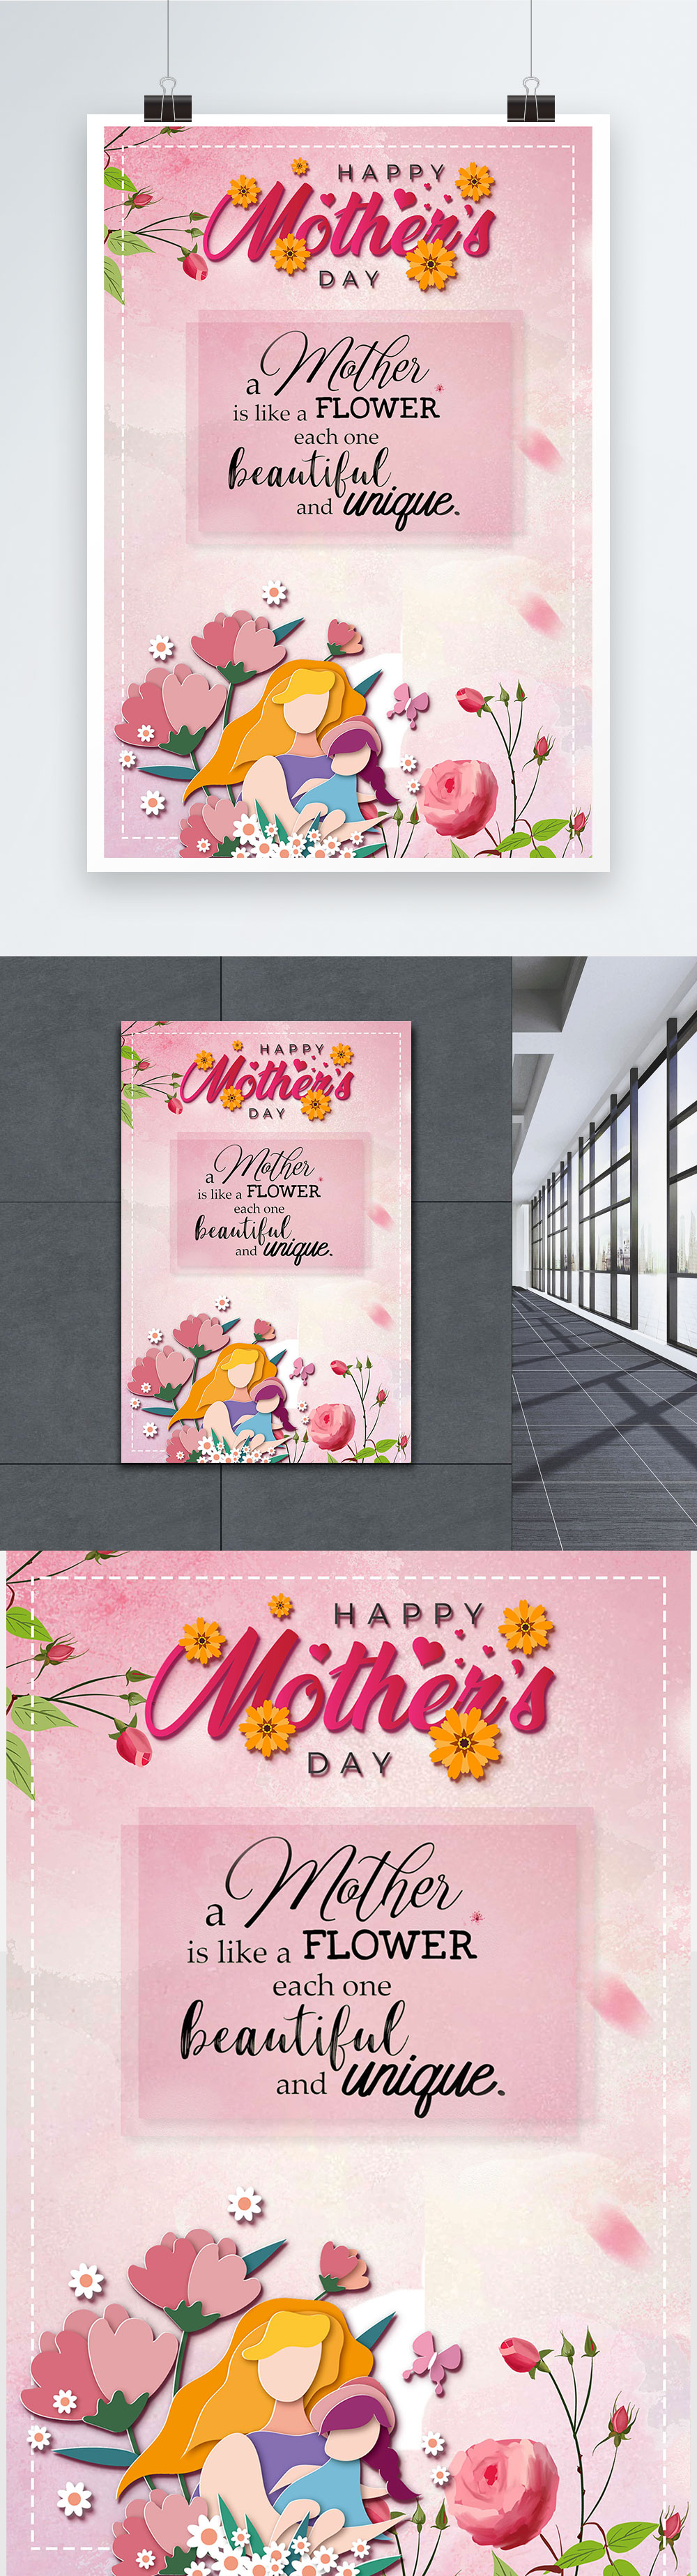 Mothers day wishes poster template image_picture free download ...